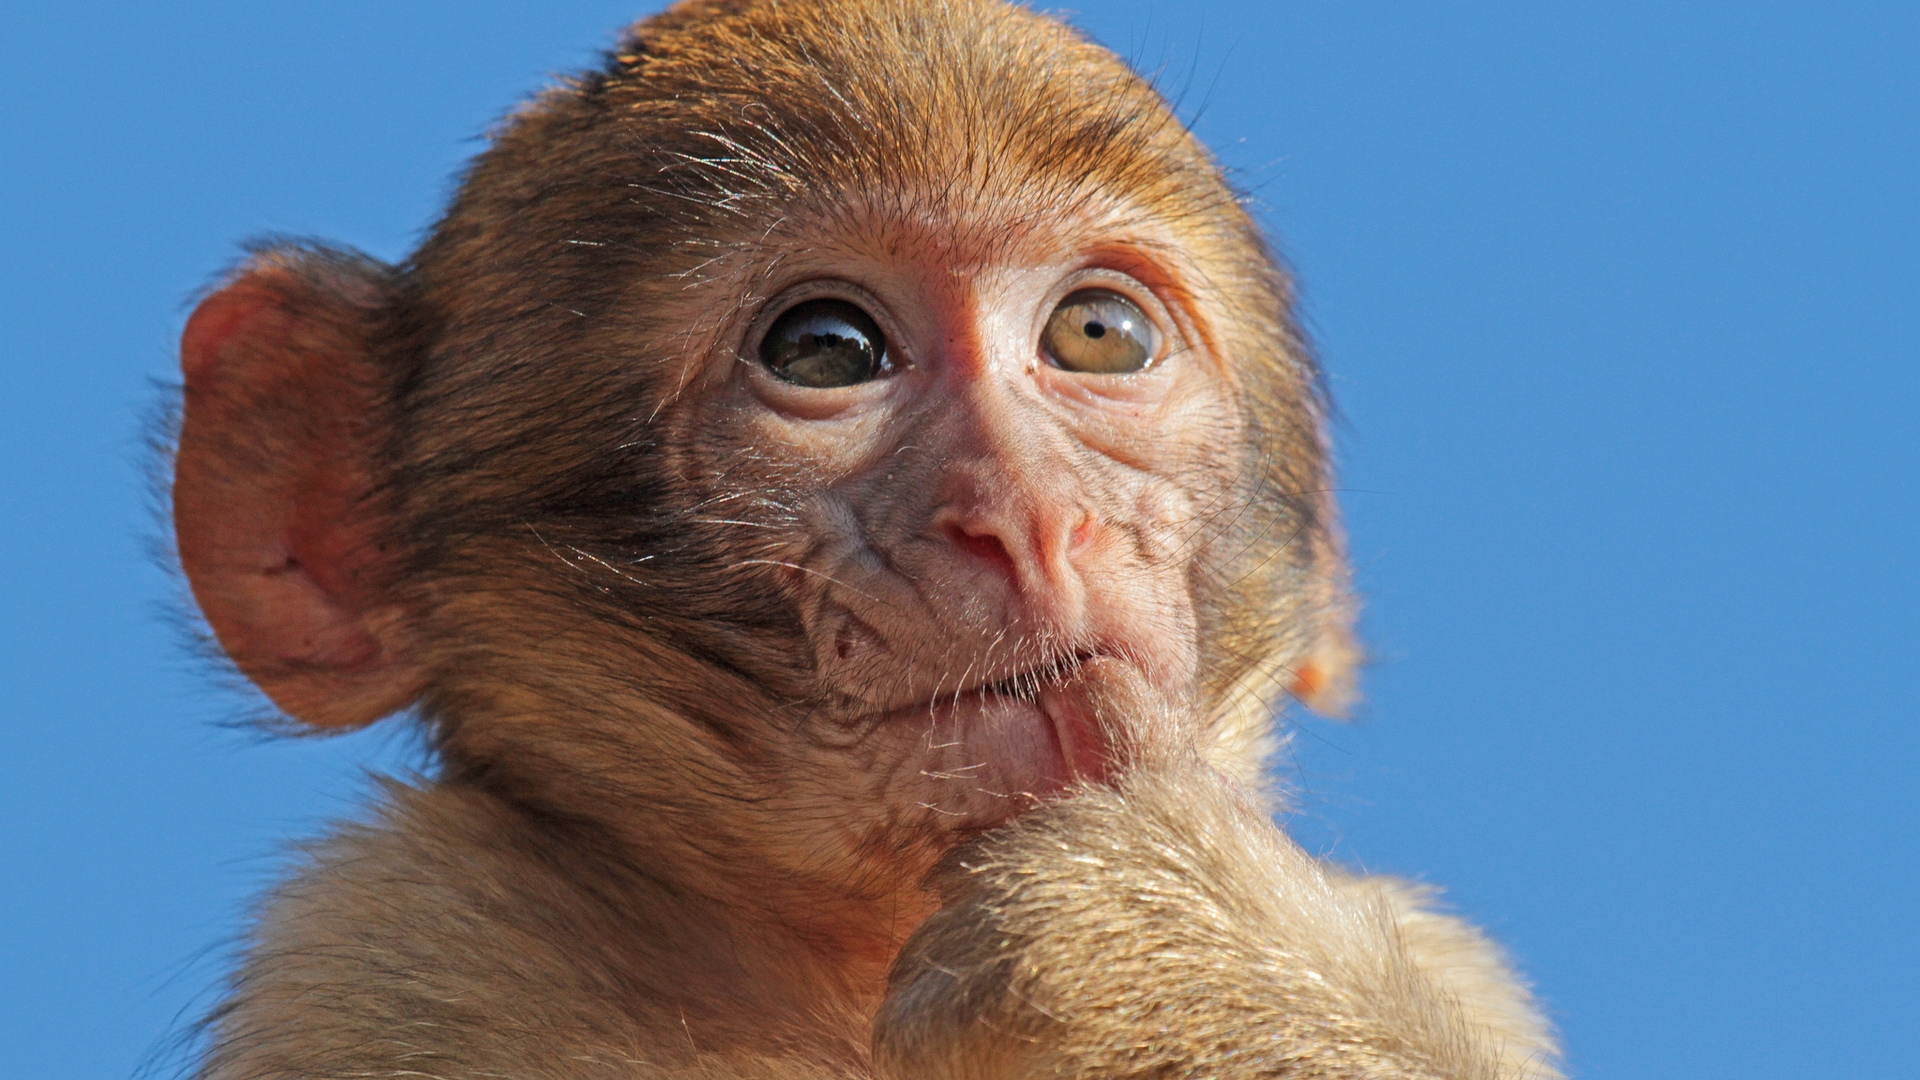 Macaque Monkey for 1920 x 1080 HDTV 1080p resolution